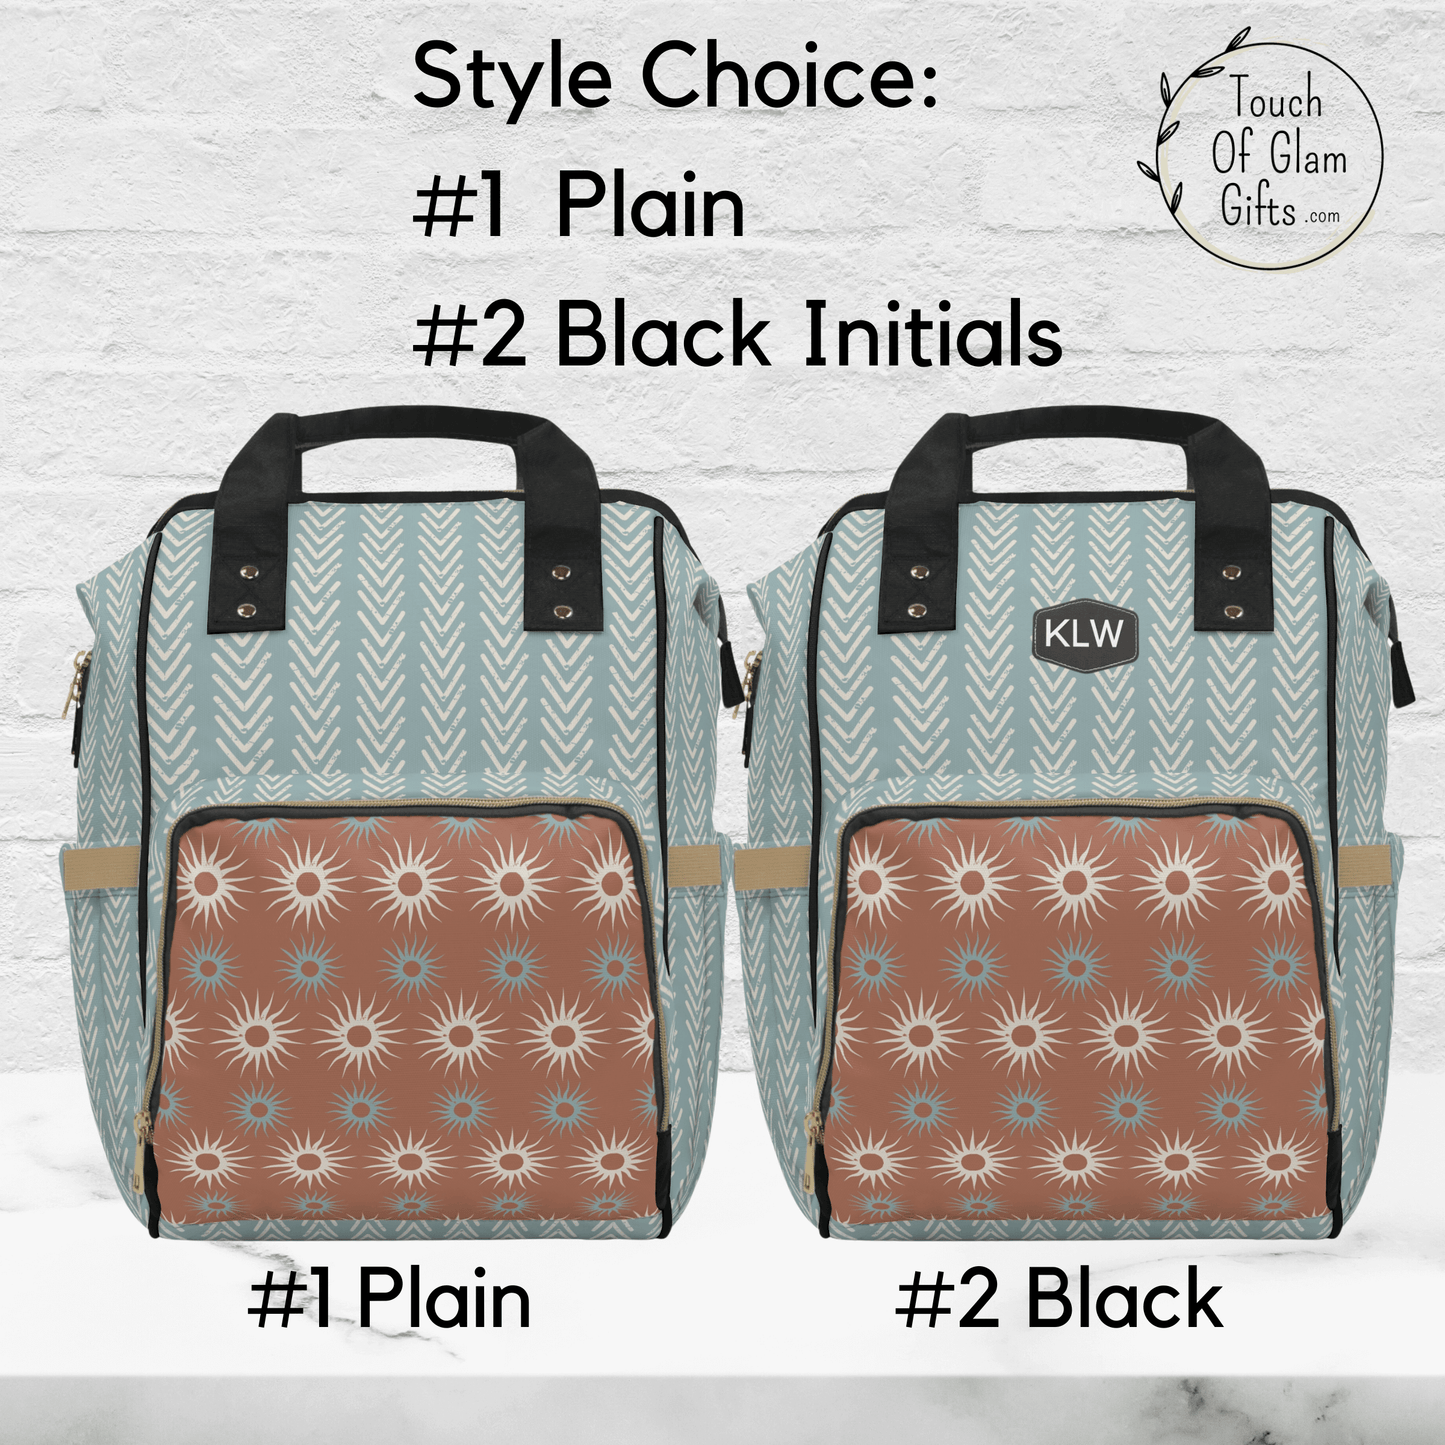 Choose to keep your boho diaper bag plain or add monogrammed initials, up to three. The initials are printed on a black printed patch by the black handles.